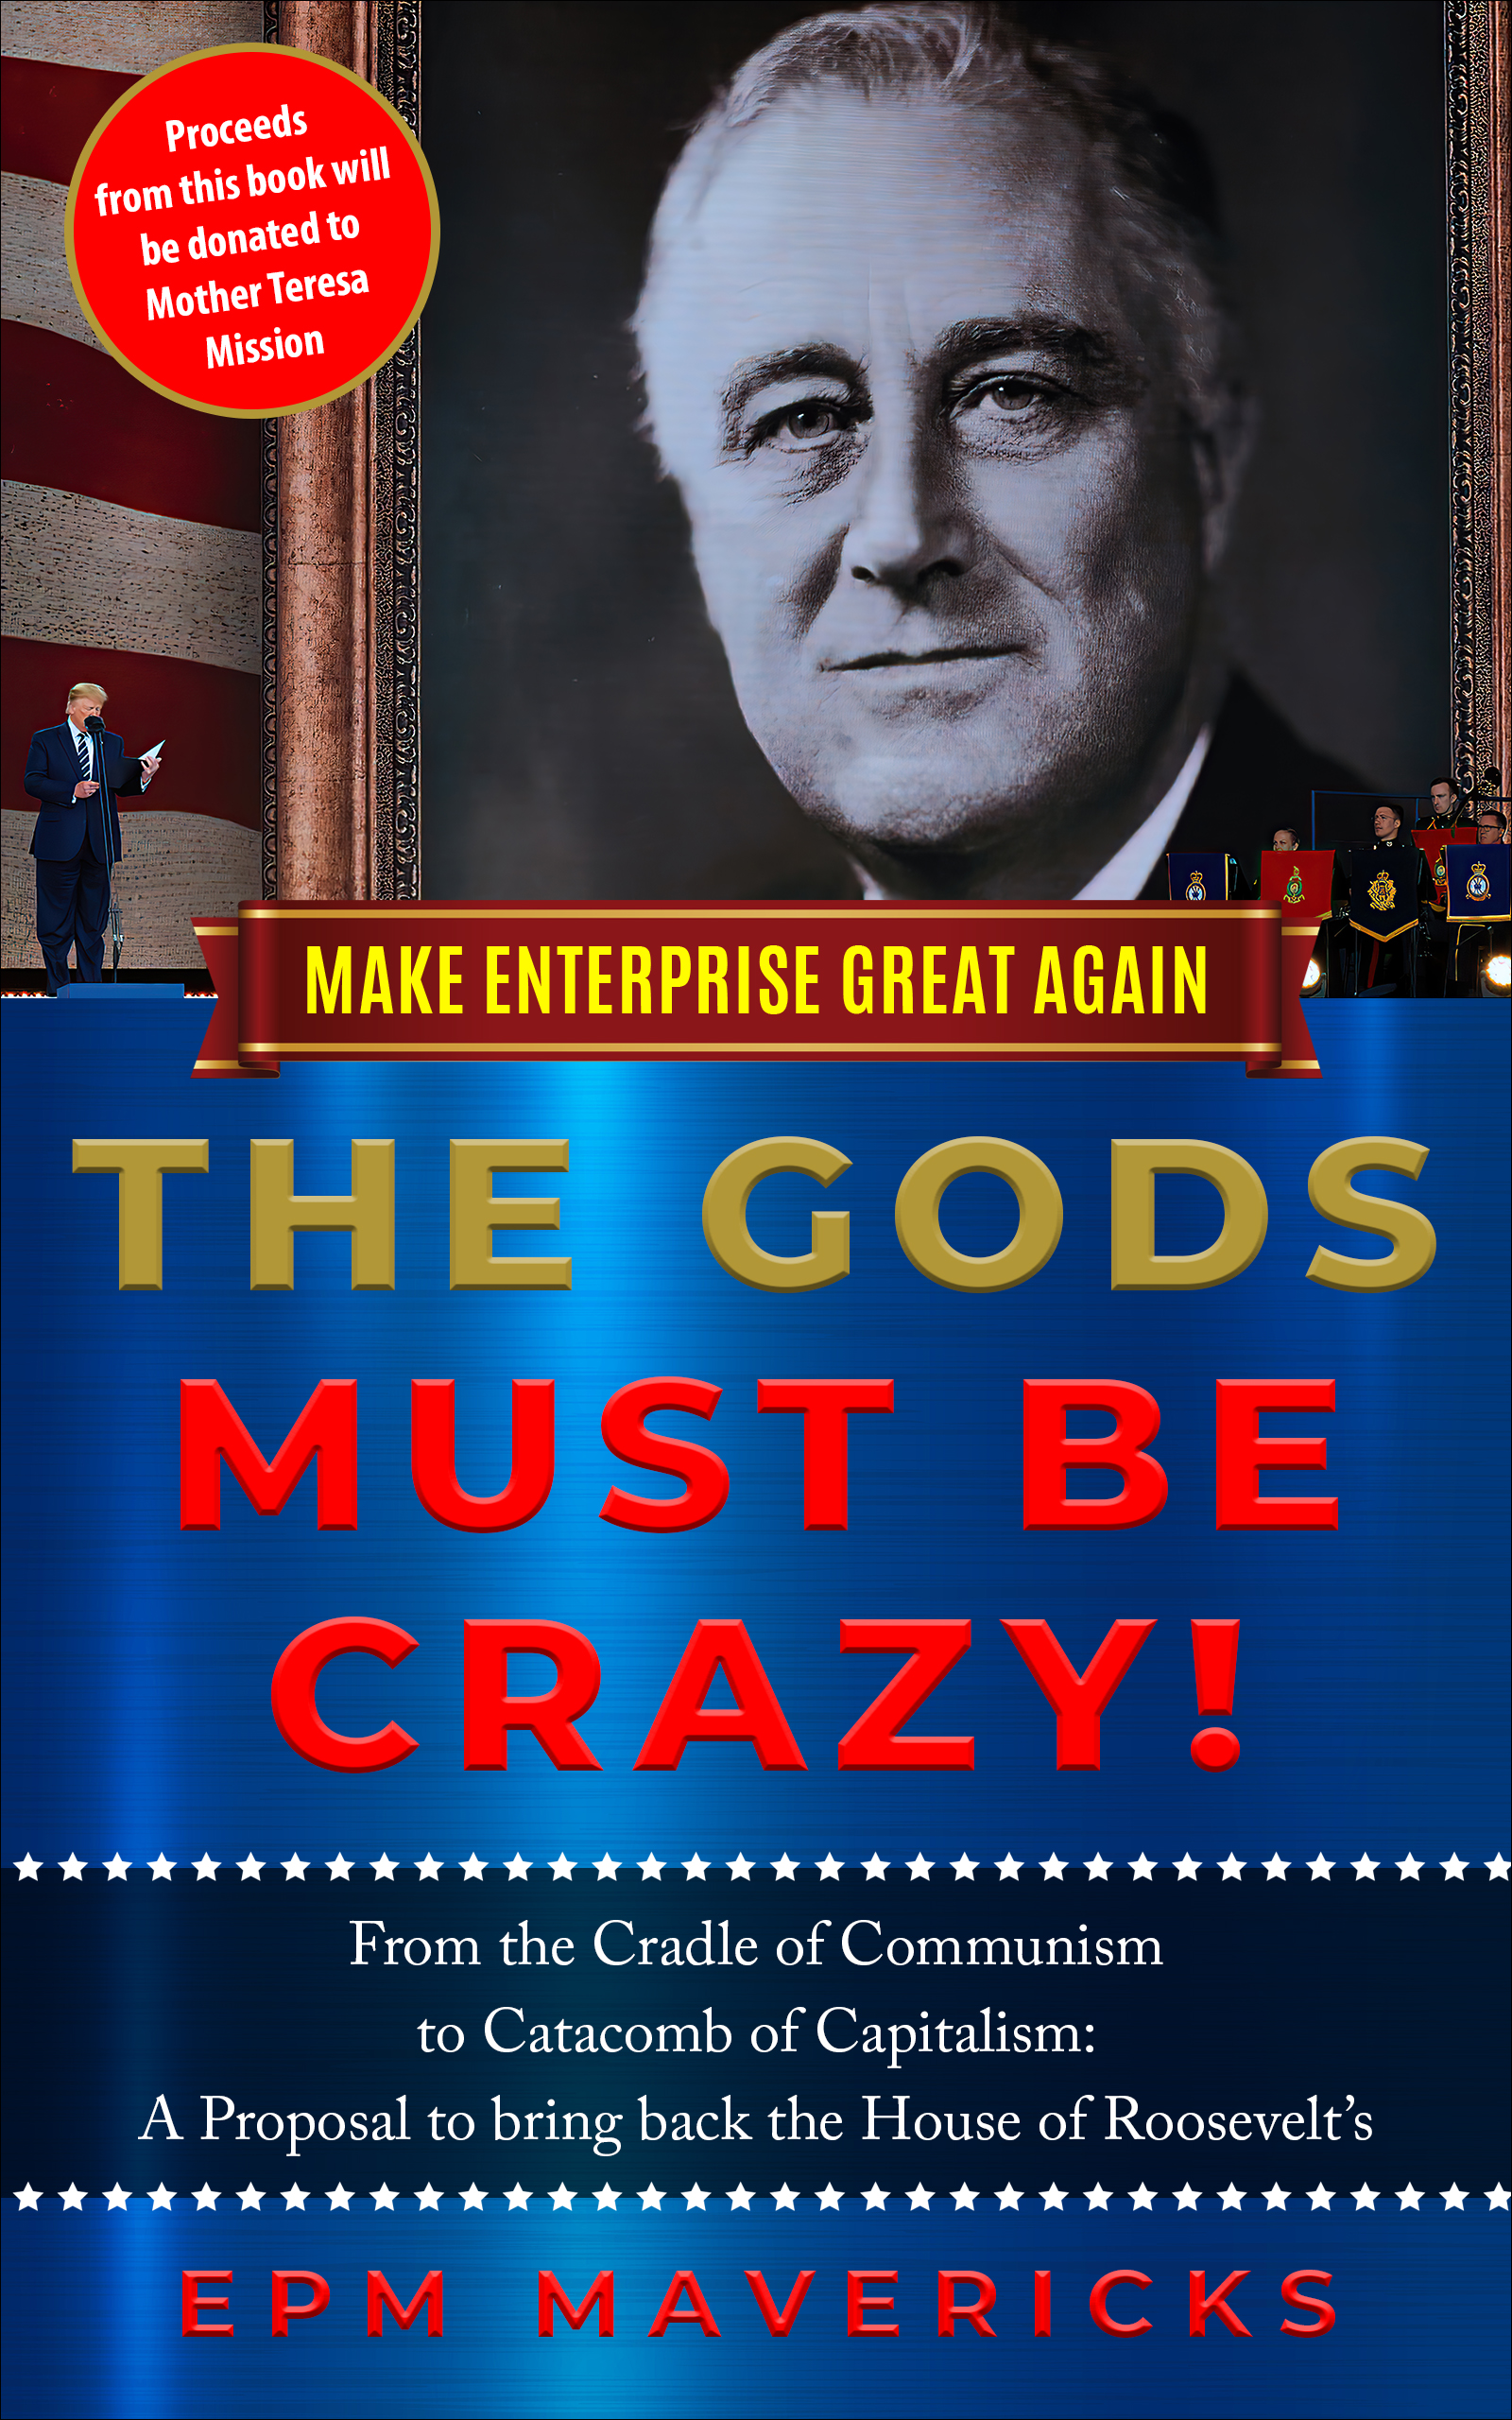 FREE: Make Enterprise Great Again: The Gods Must Be Crazy!: Cradle of Communism to Catacomb of Capitalism: A Proposal to bring back the House of Roosevelt’s by EPM Mavericks